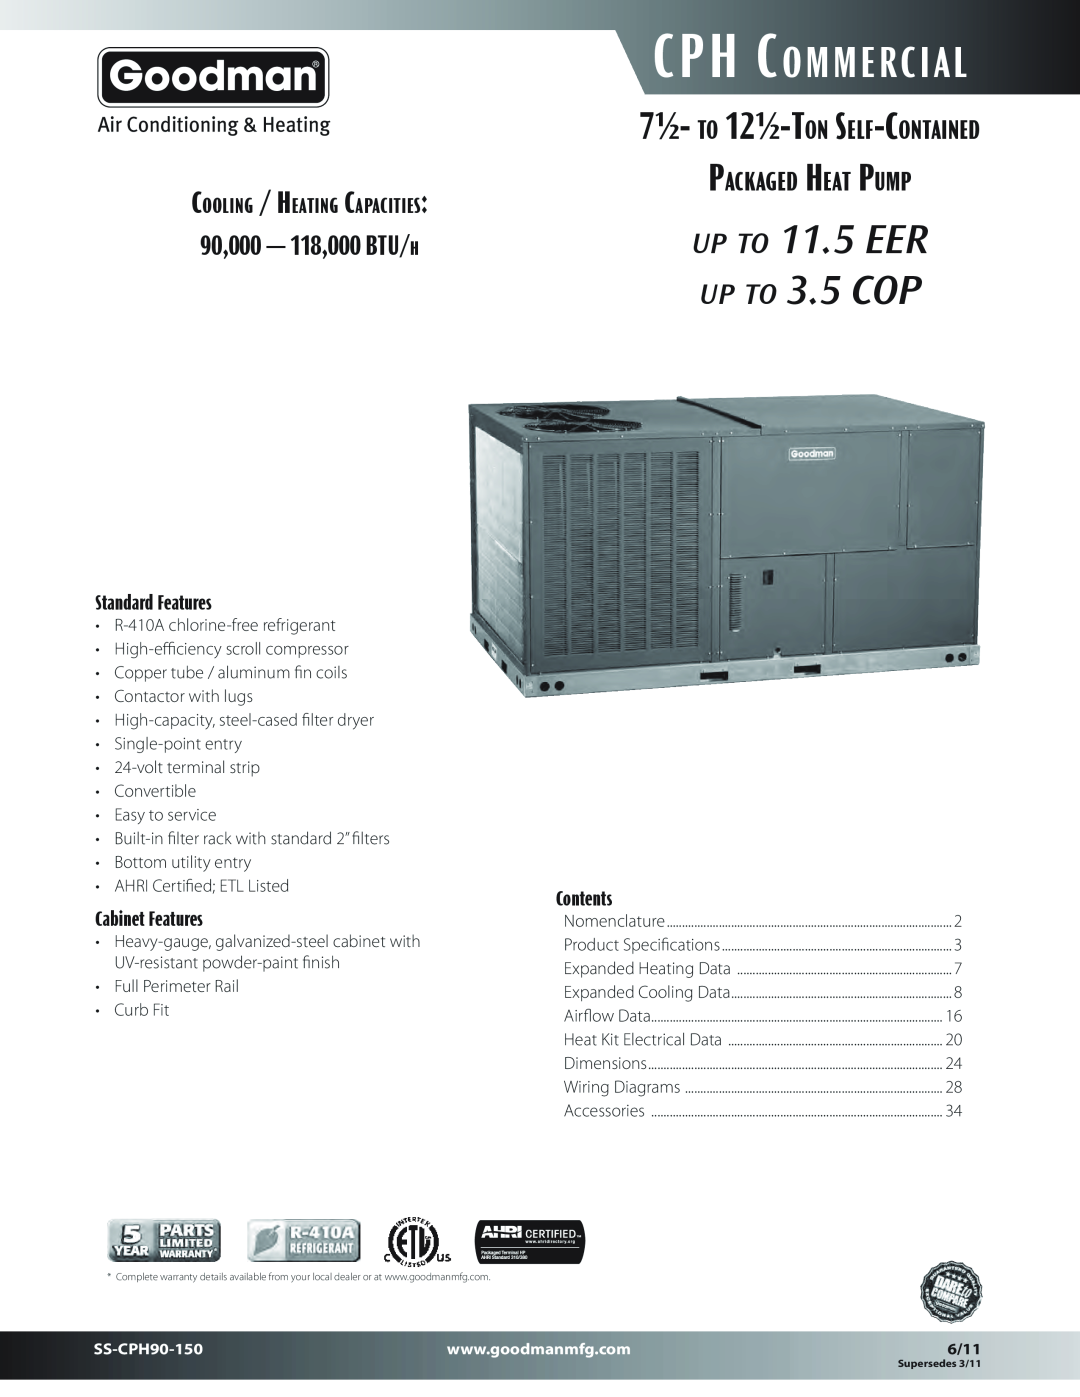 Goodman Mfg SS-CPH90-150 dimensions 90,000 - 118,000 BTU/h, Packaged Heat Pump, Cooling / Heating Capacities, Contents 